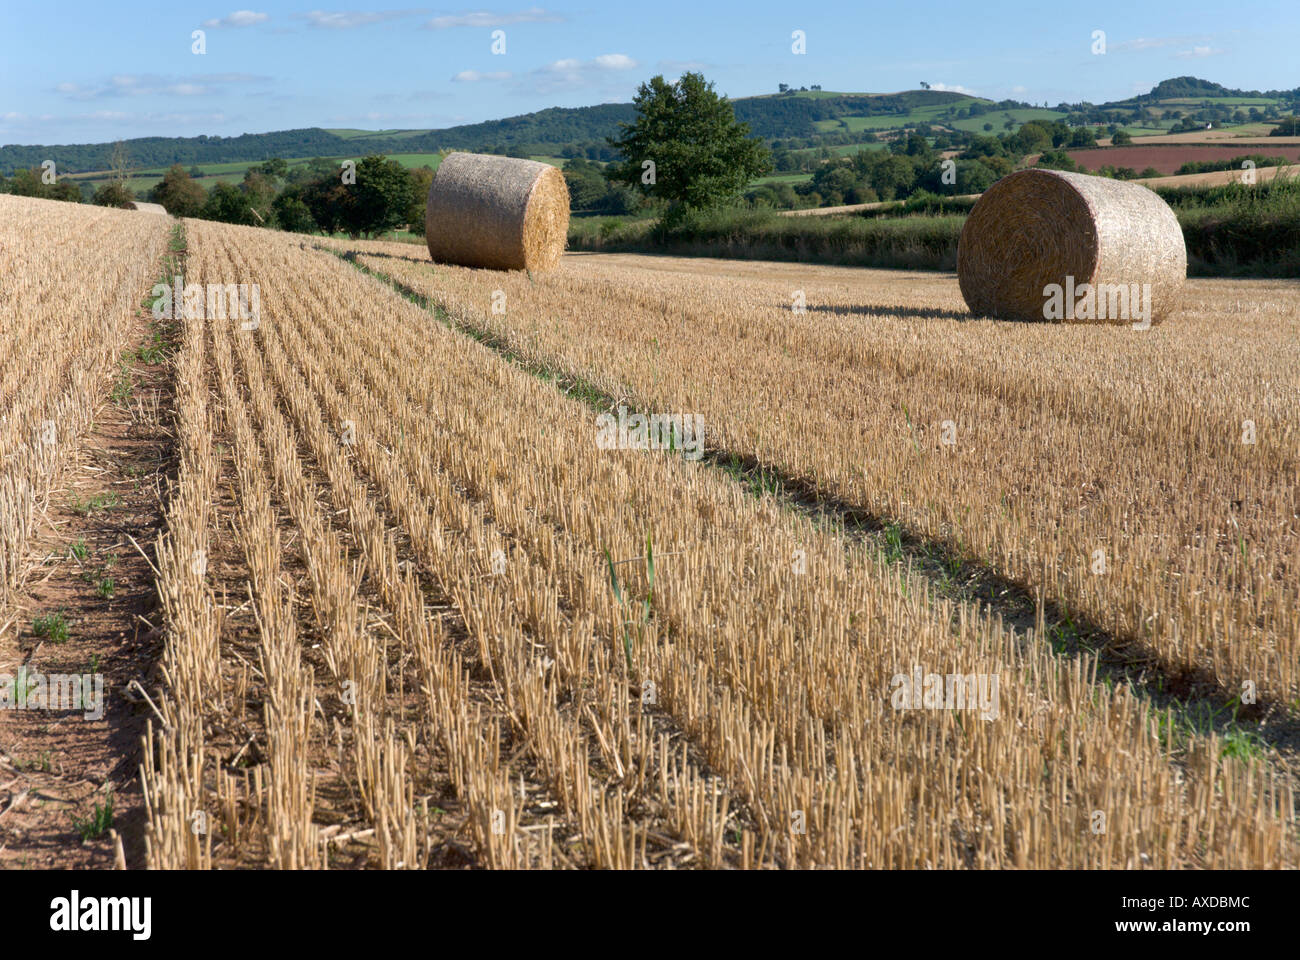 Bales of hay in corn field Stock Photo